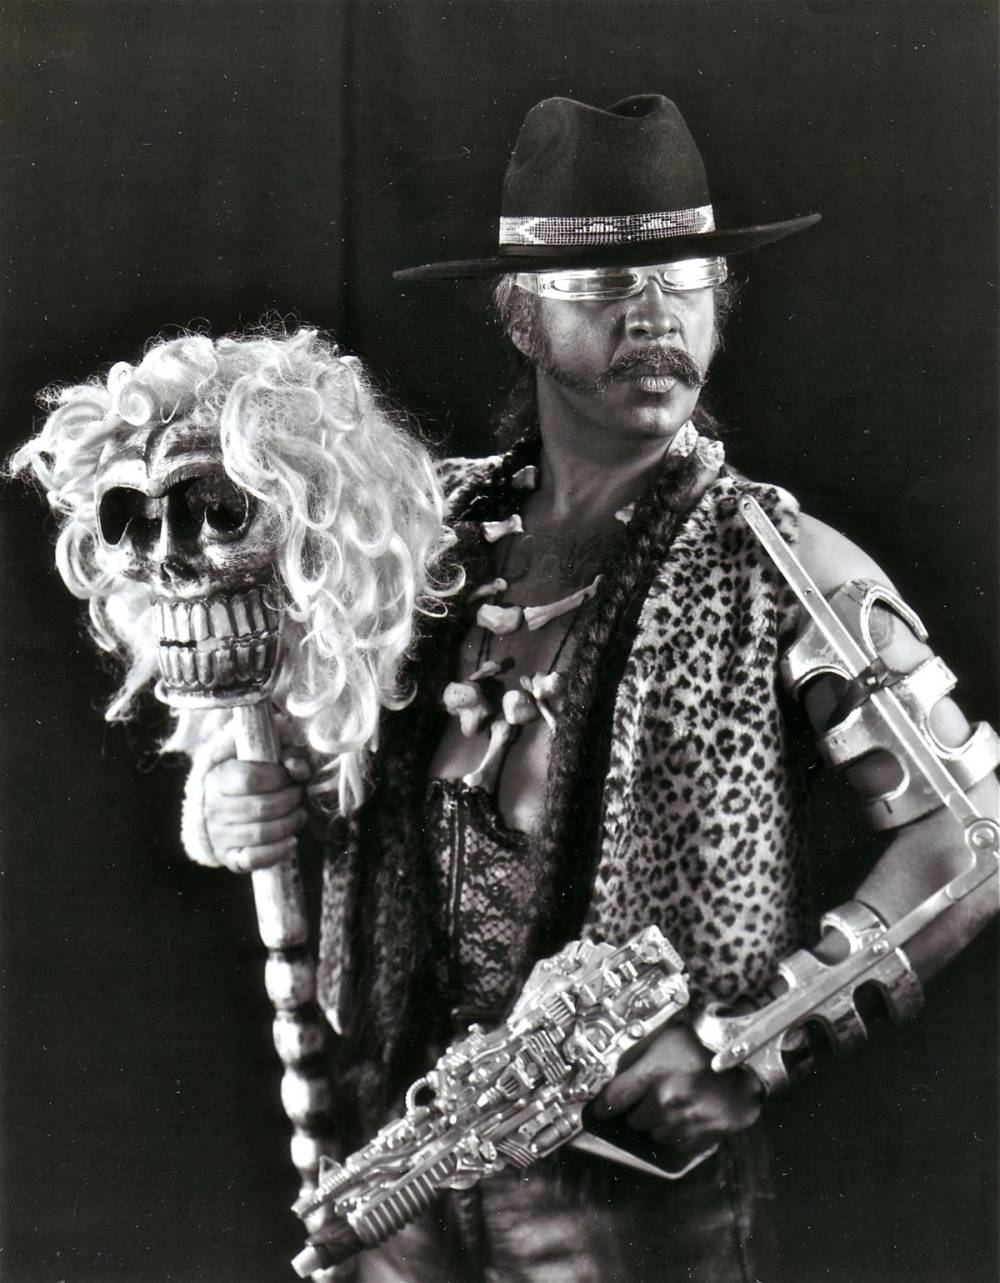 Guillermo Gómez-in sunglasses and a hat holding a toy gin and staff with a skull mask atop it.